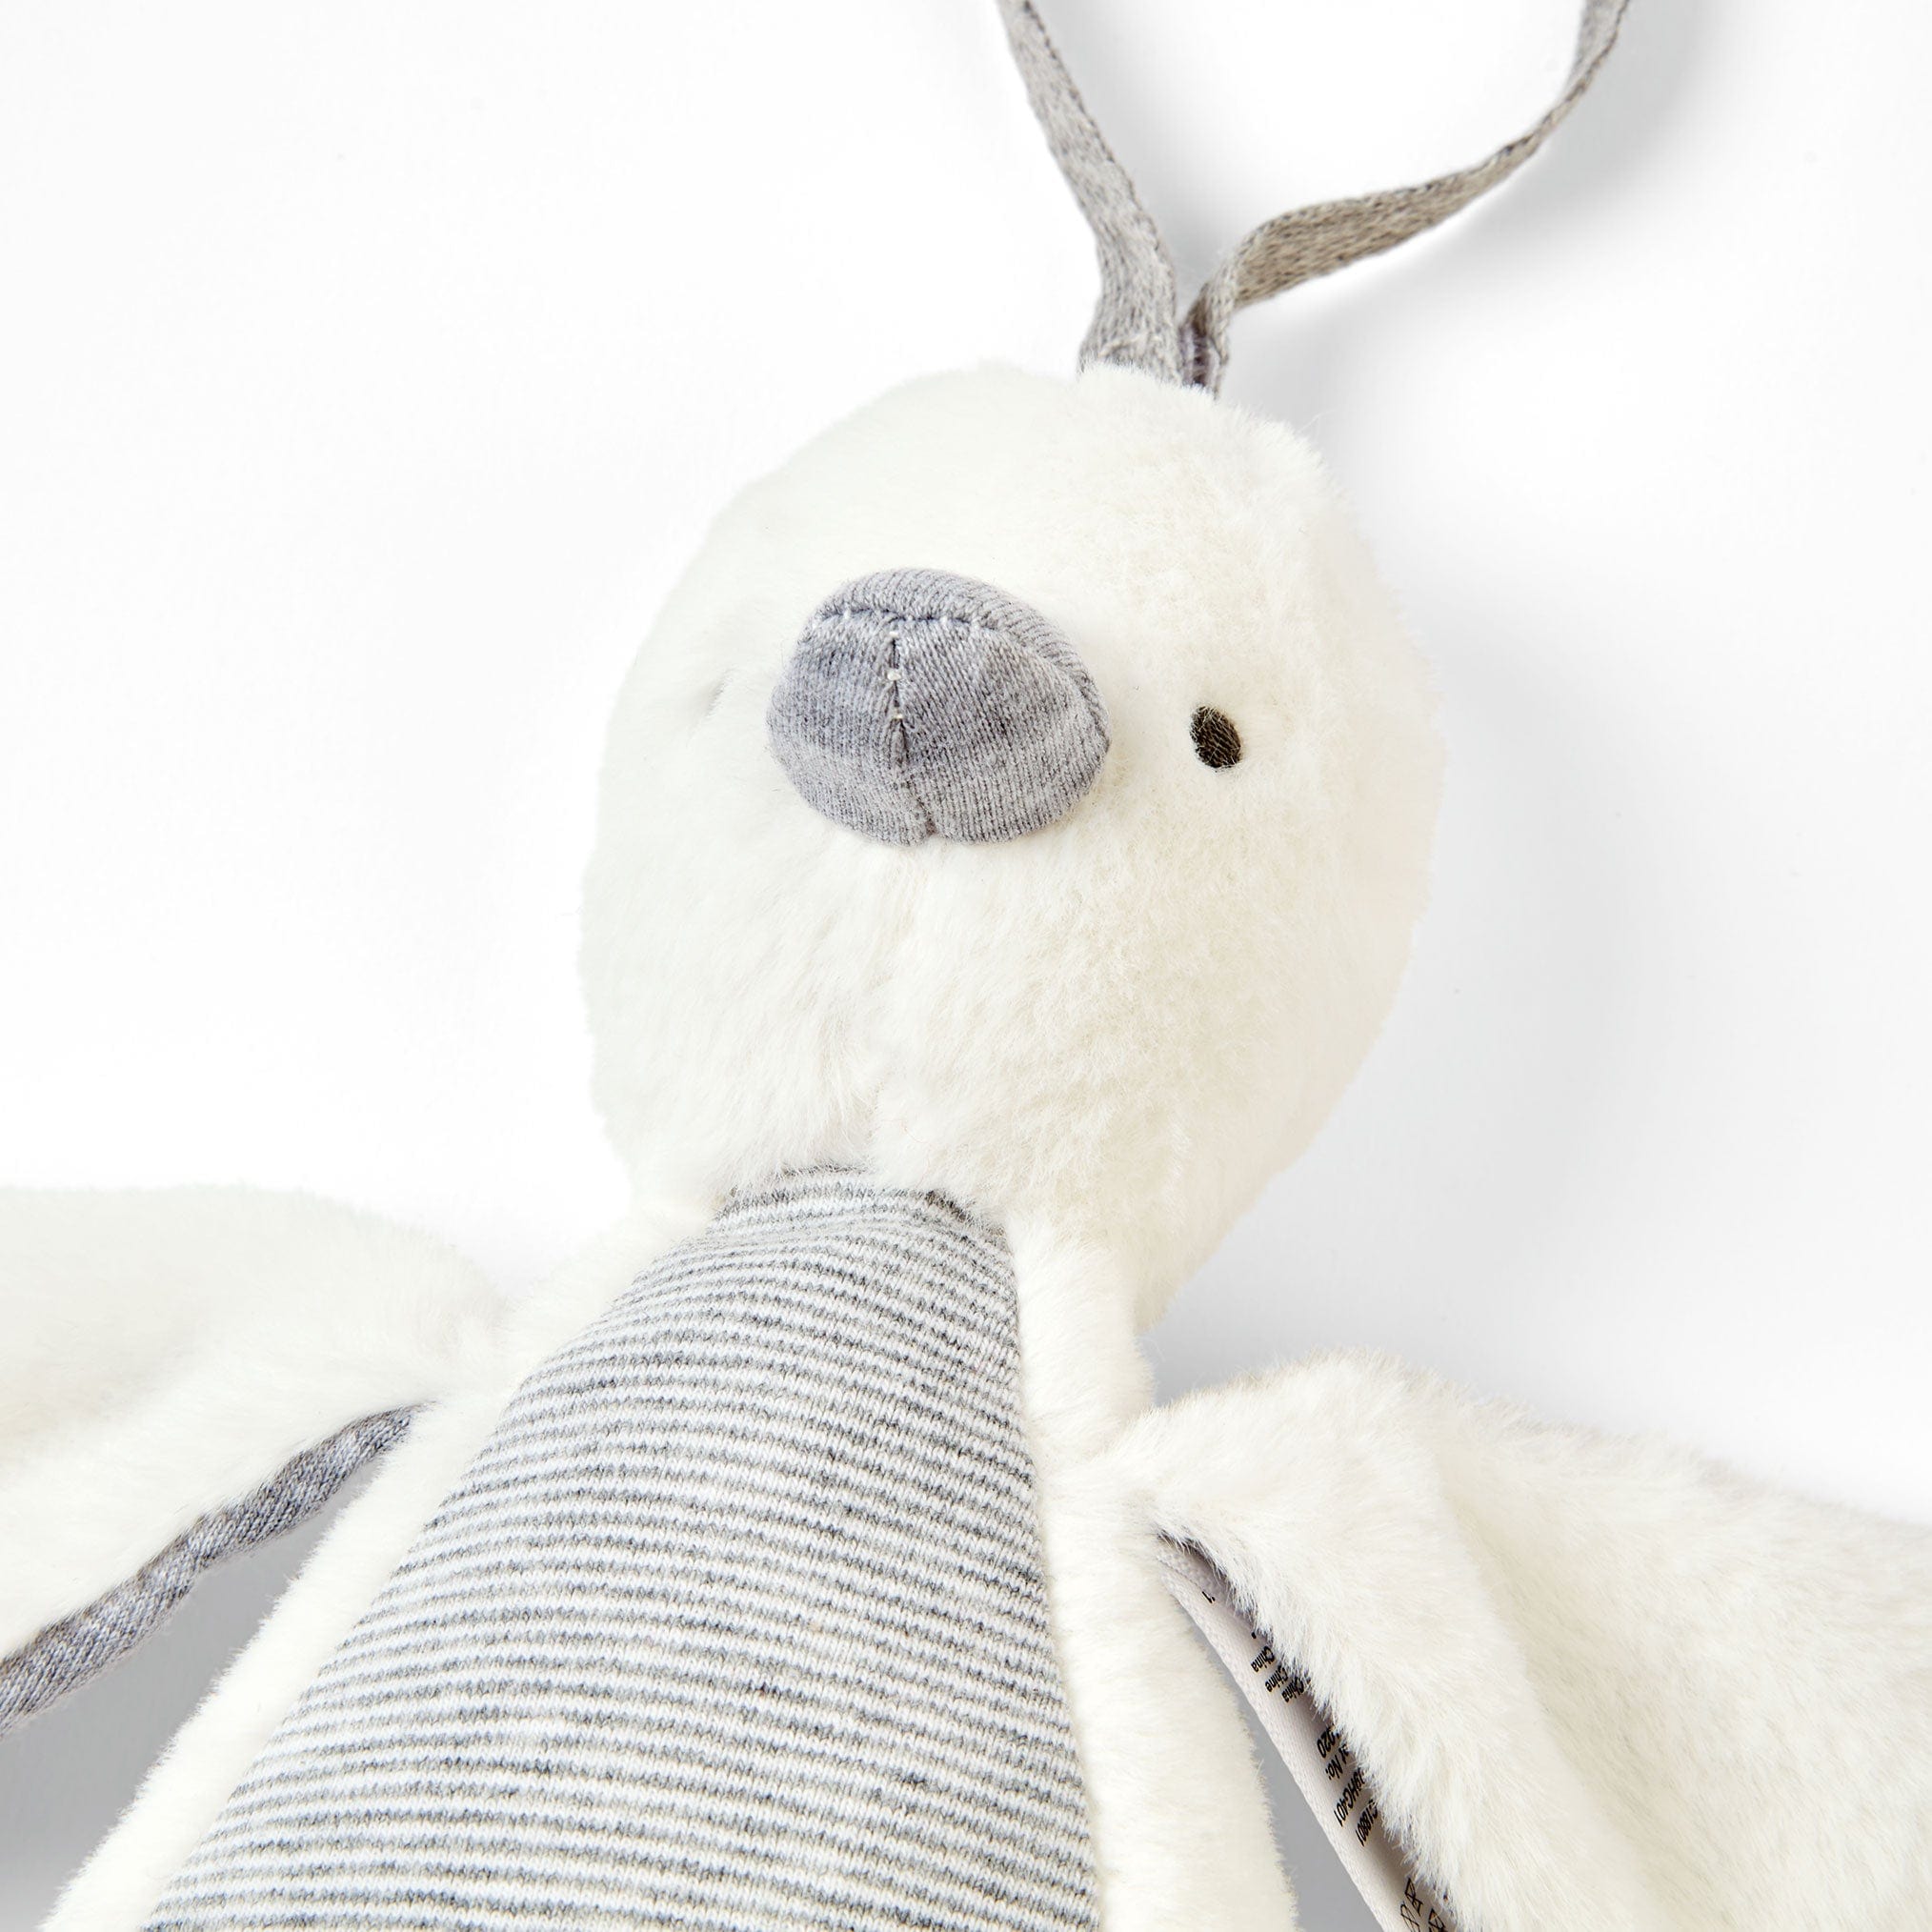 Mamas & Papas soft animals Mamas & Papas Soft Travel Toy Welcome to the World - Grey Chime Duck 7609HG401